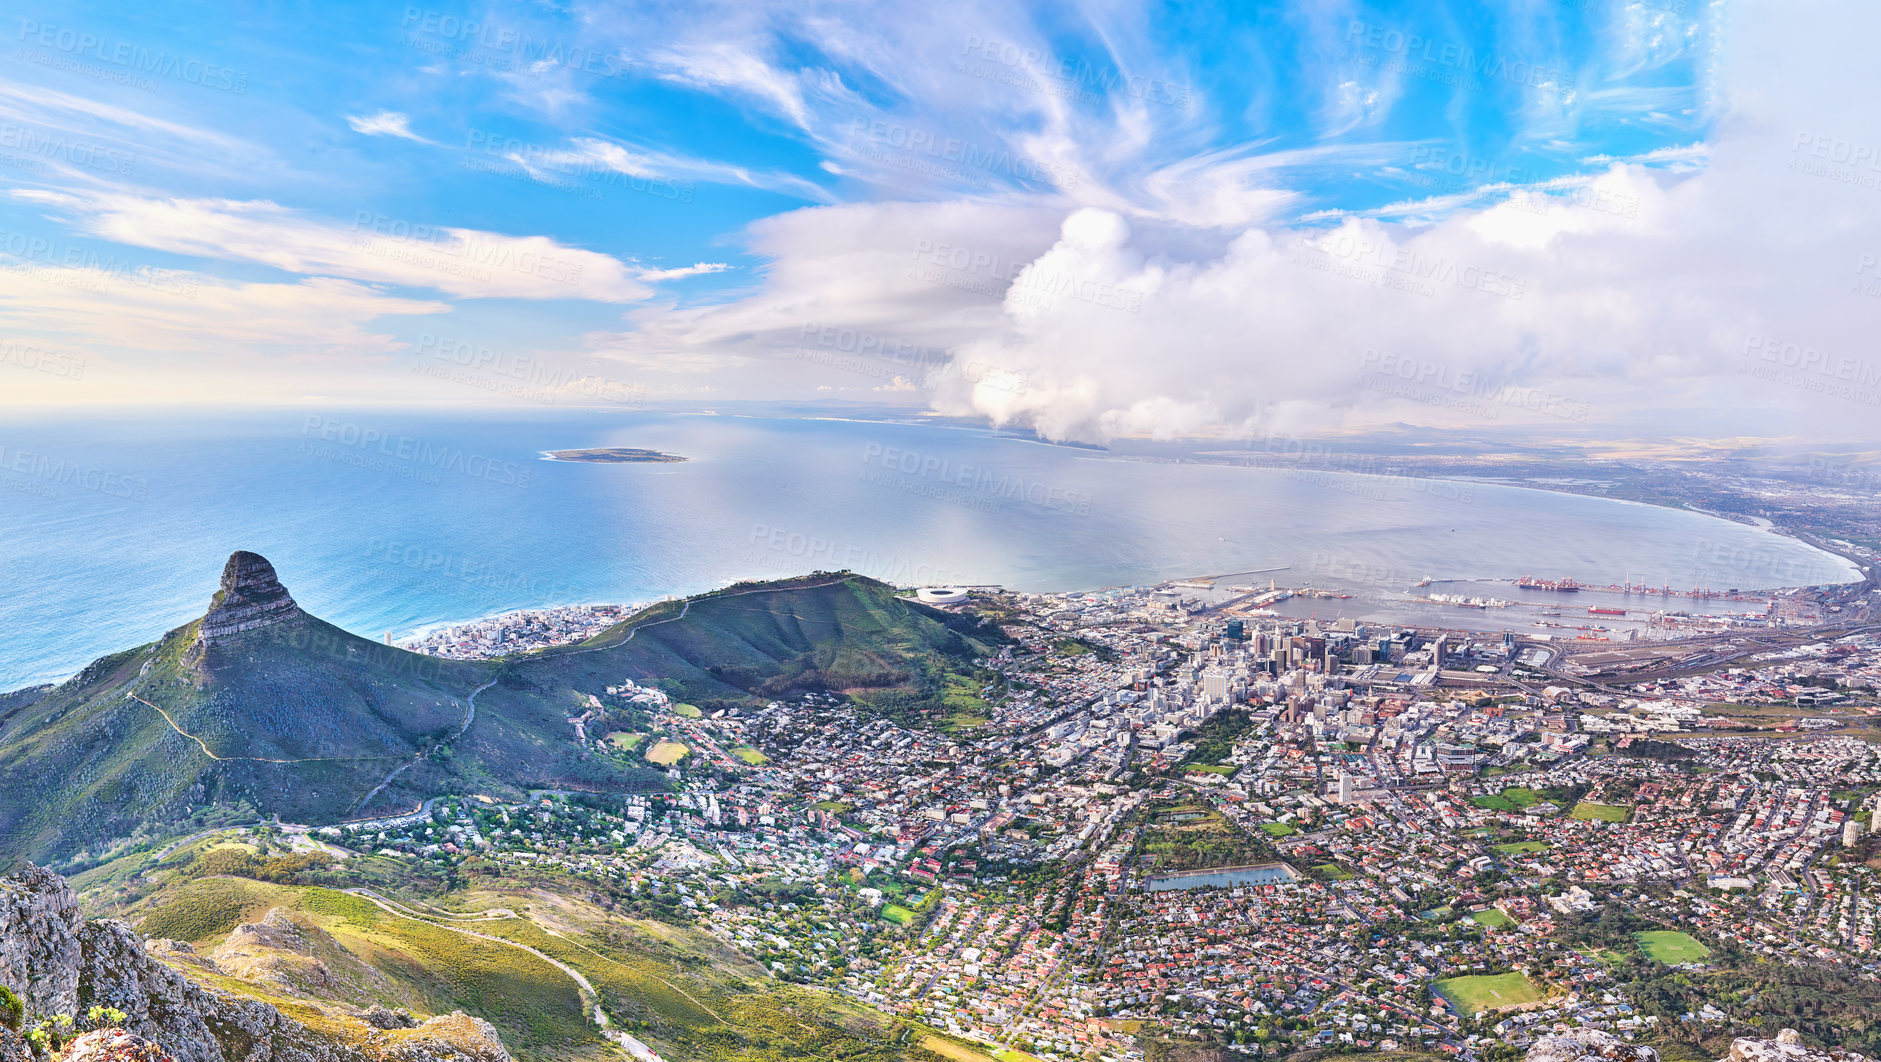 Buy stock photo Copyspace landscape view of Lion's Head and surroundings during the day in summer from above. Aerial view of the beautiful city of Cape Town with popular natural landmarks against a cloudy blu sky